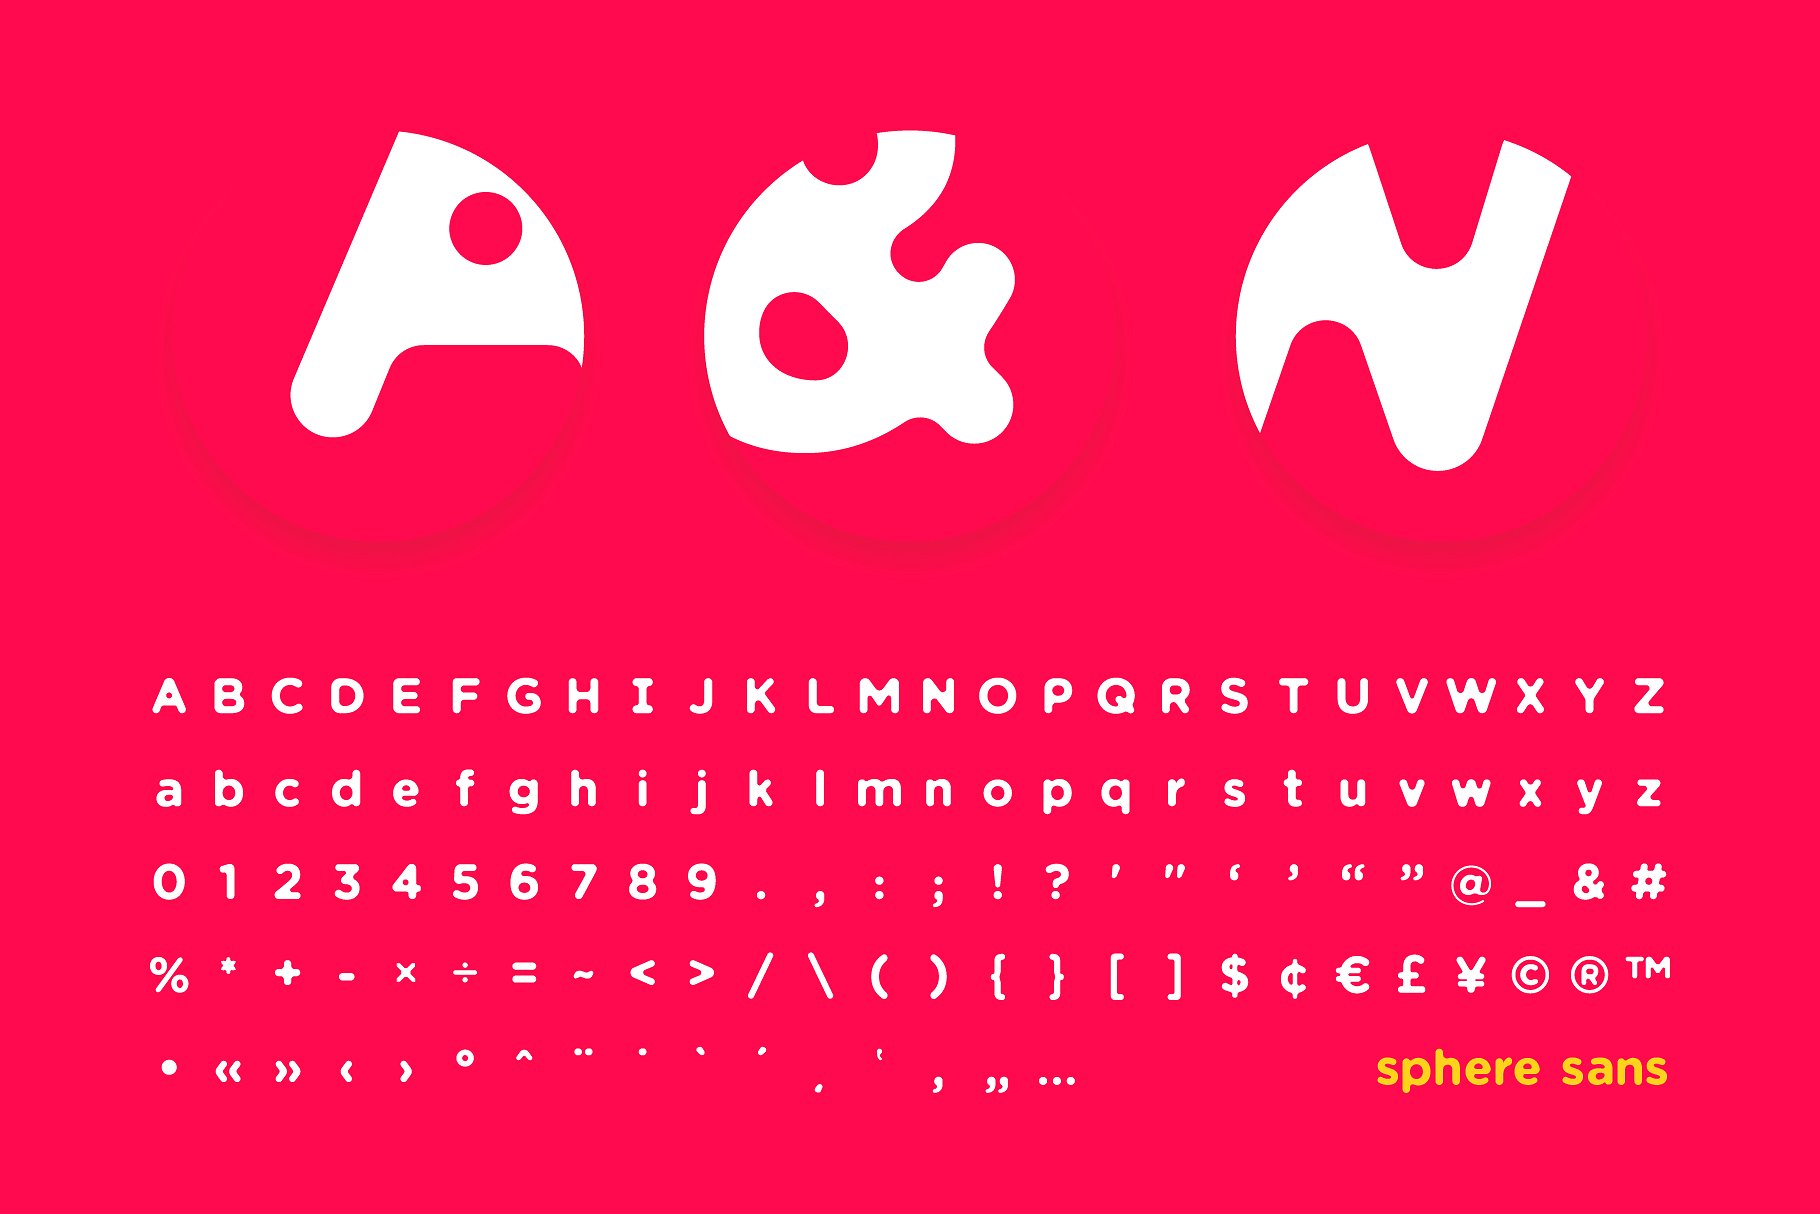 Sphere Sans柔软坚固球形字体 Sphere Sans Soft And Solid Spherical Font插图1